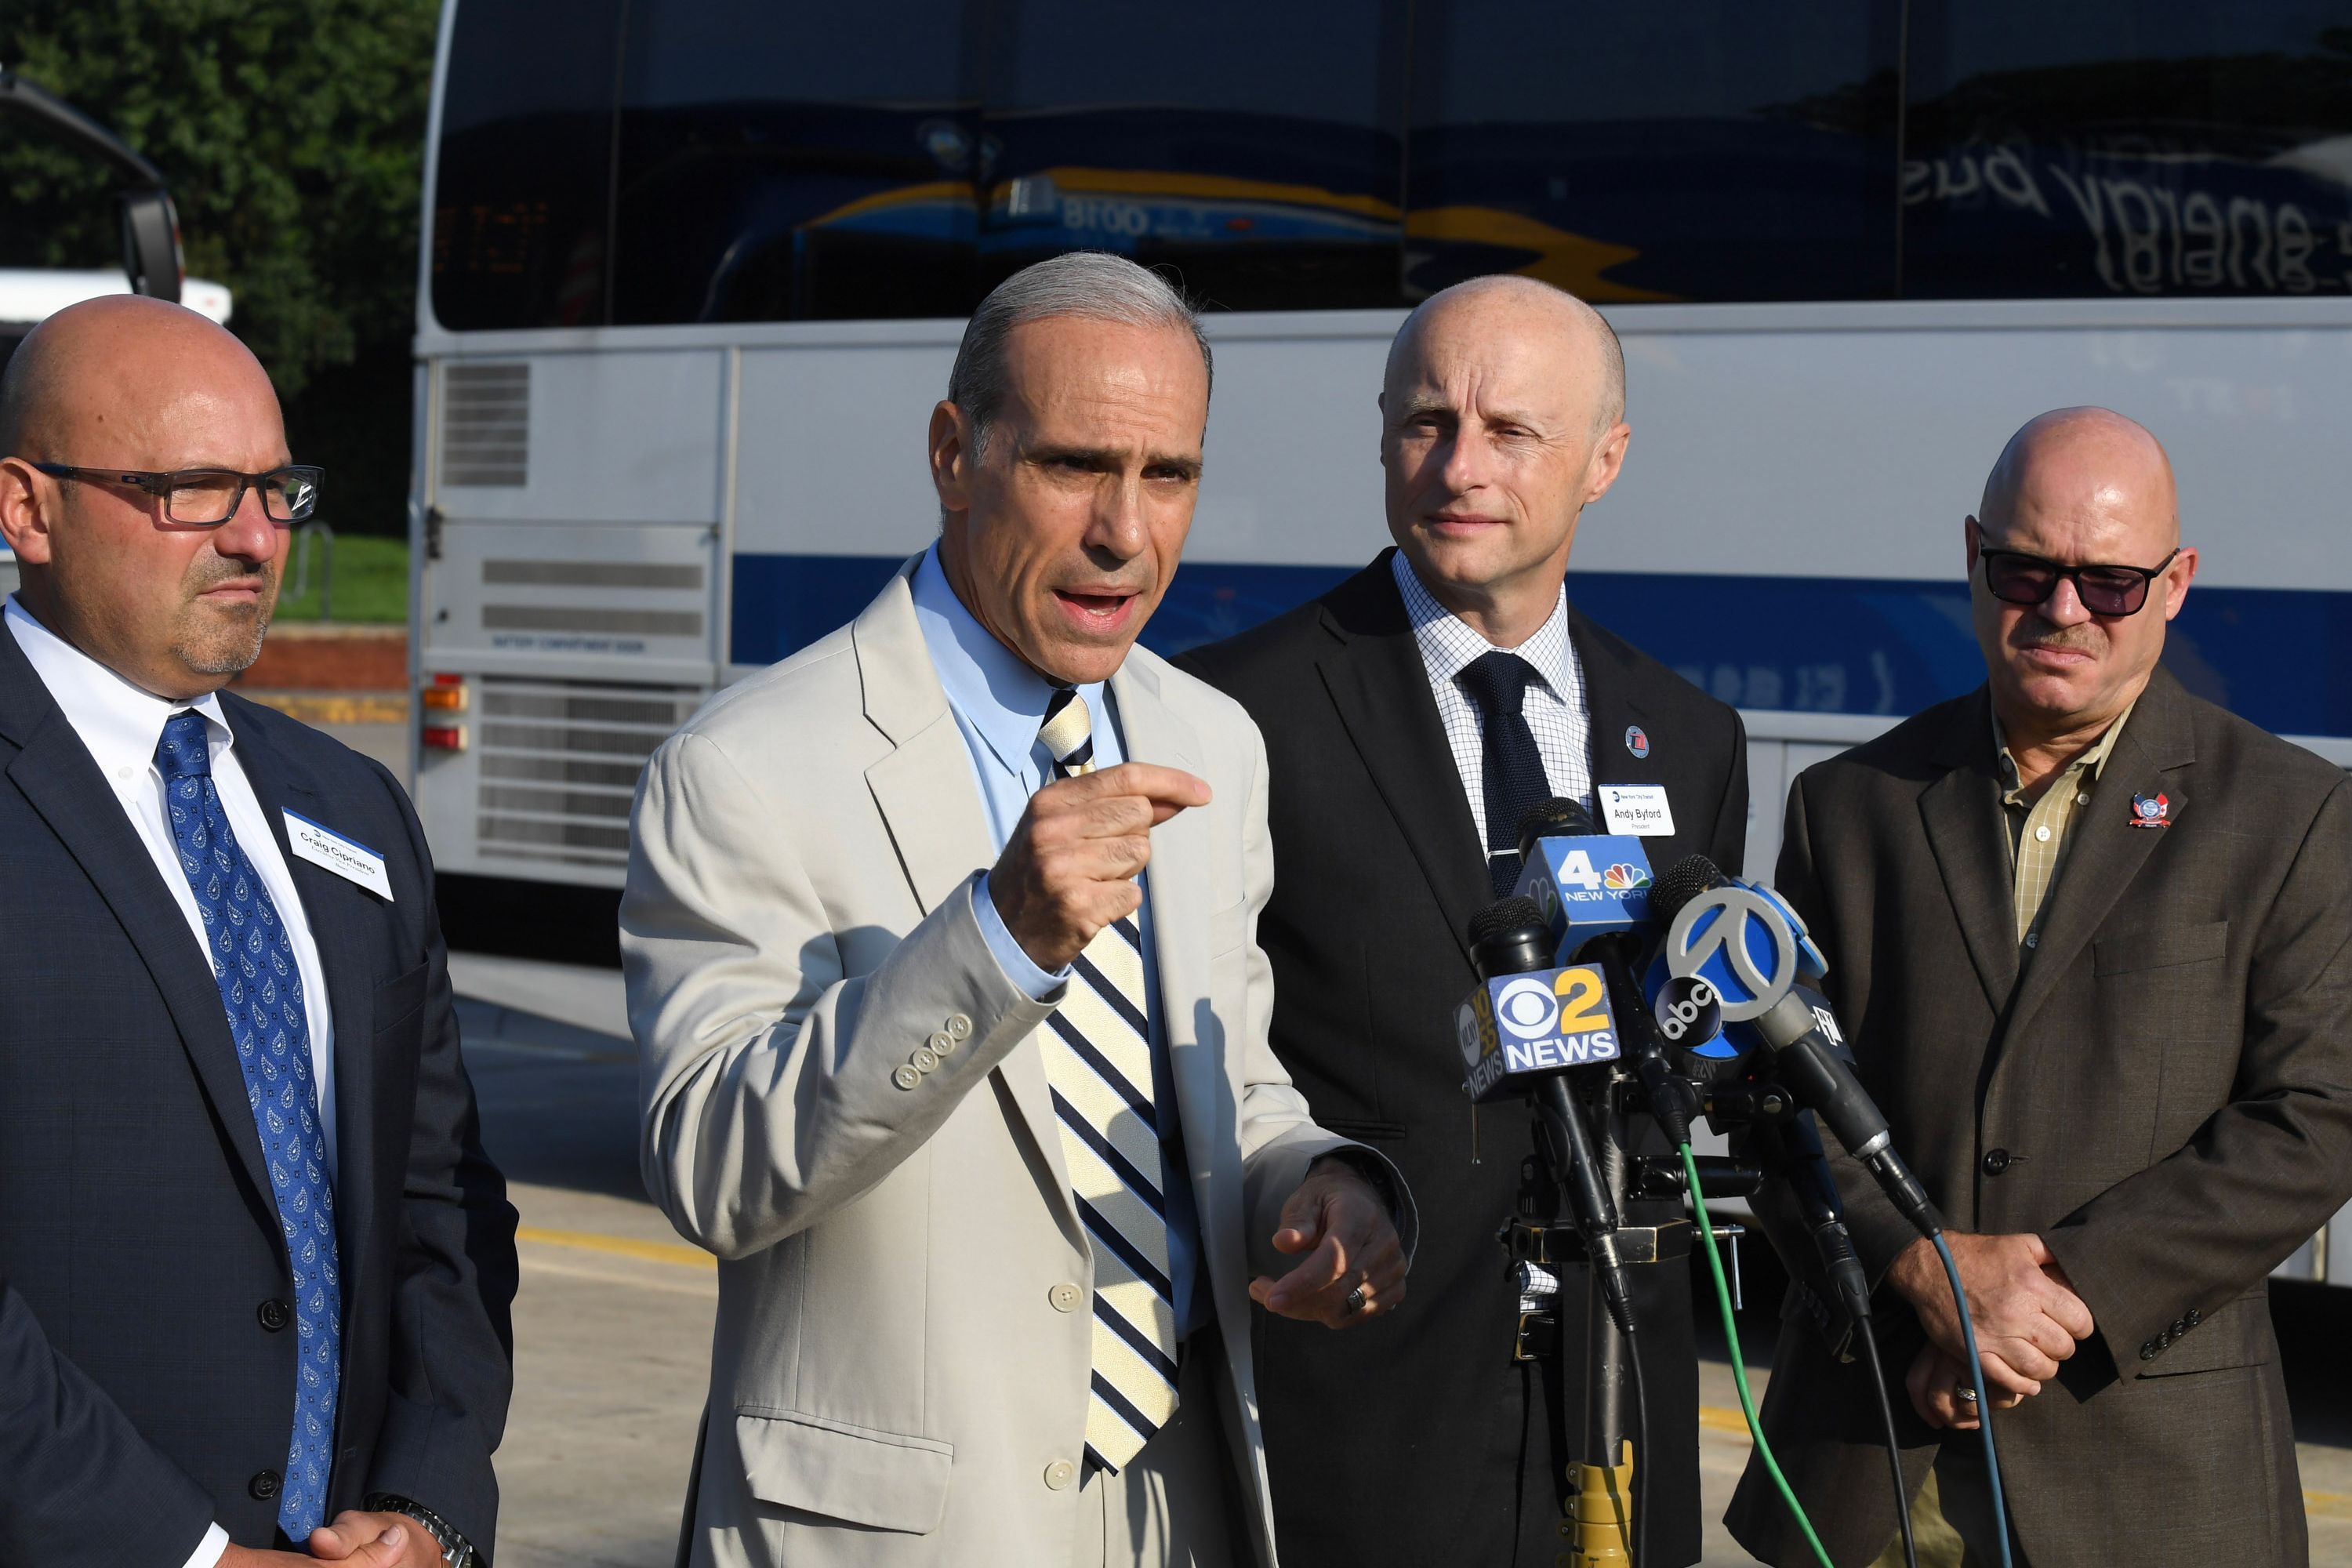 Staten Island Borough President James Oddo, speaks with MTA and union officials at the Eltingville Transit Center in August 2019.